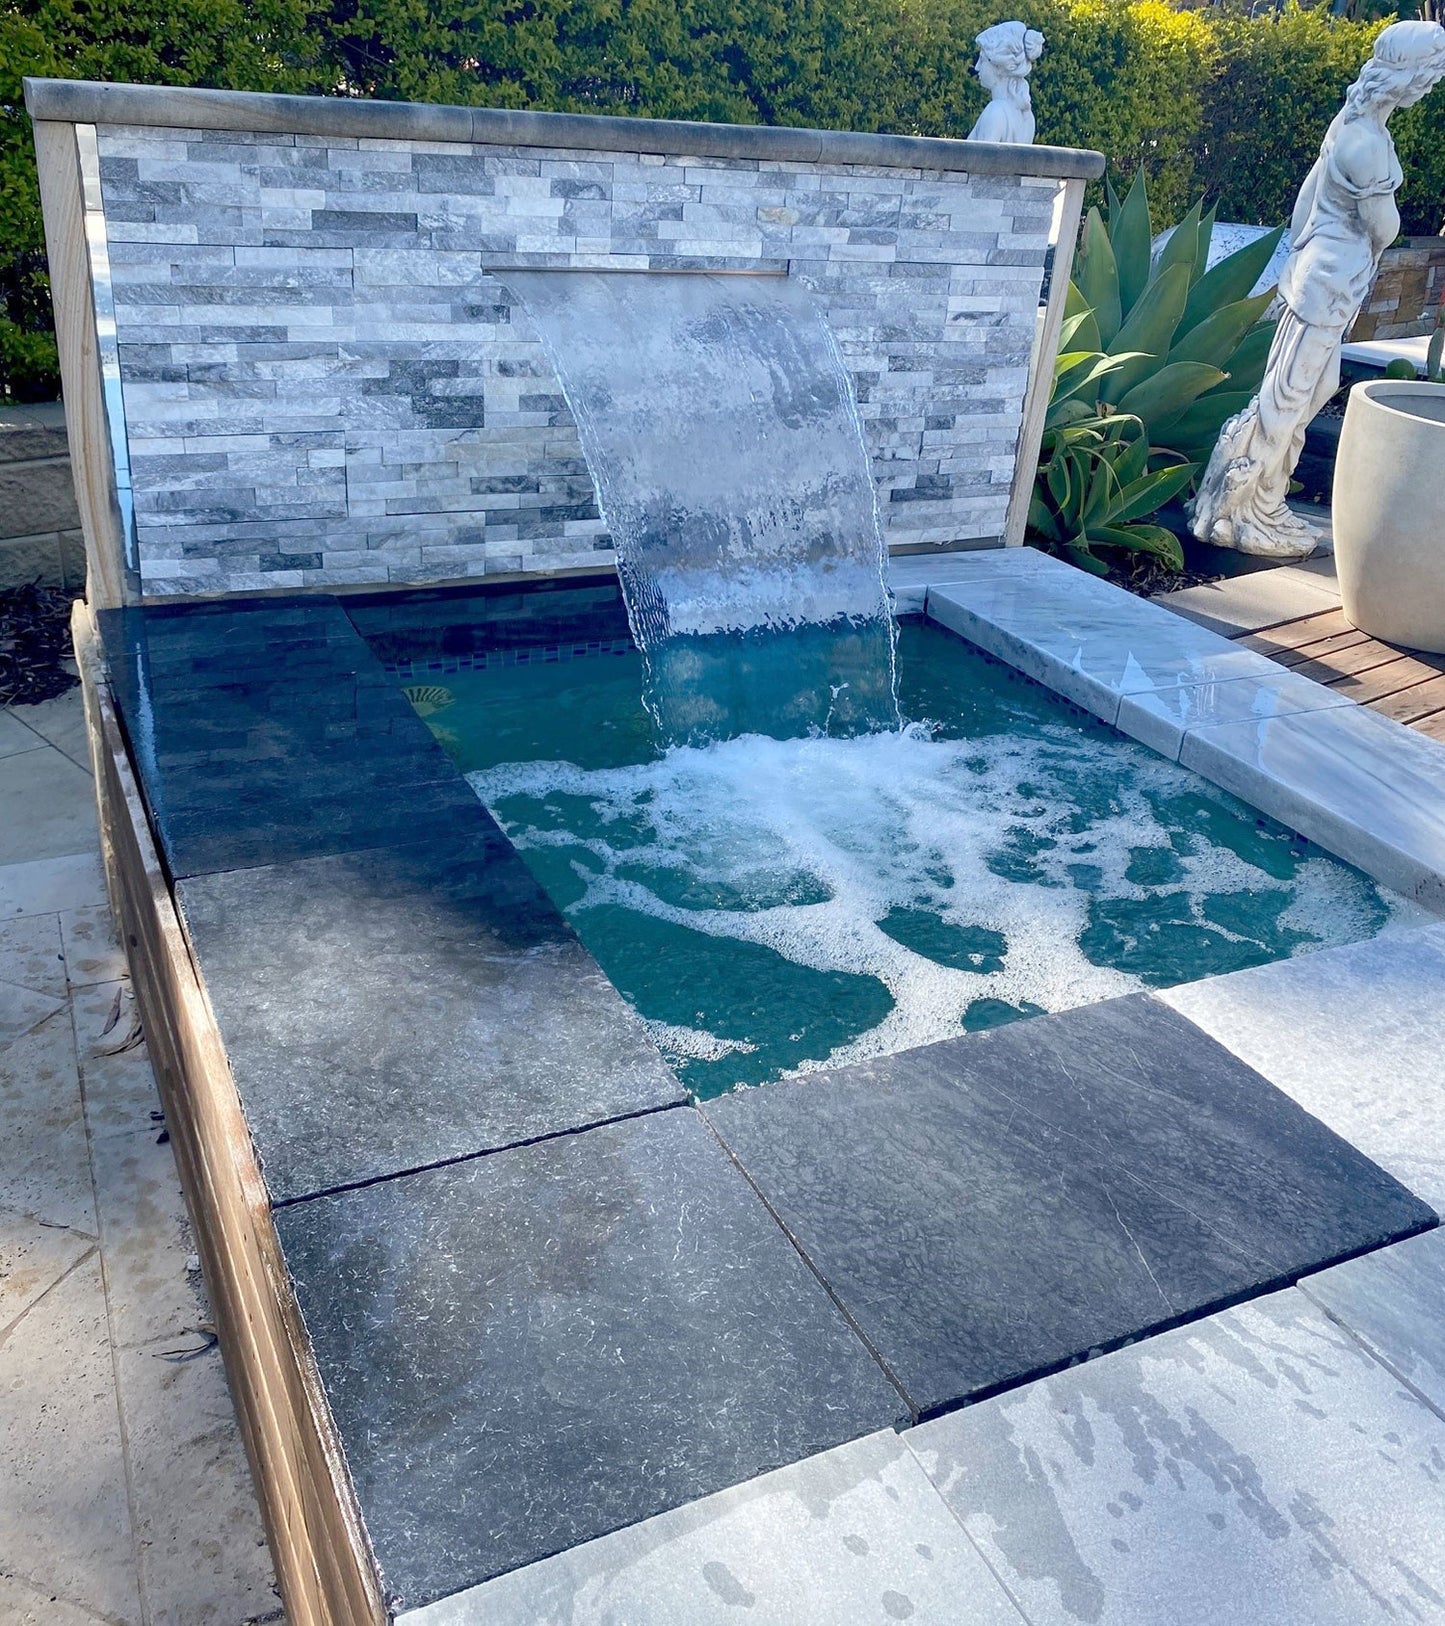 Lavido Tumbled Marble 600x400x30/60mm Drop Nose Swimming Pool Coping - 1st Quality - Laid around Swimming Pool - Available at iPave Natural Stone